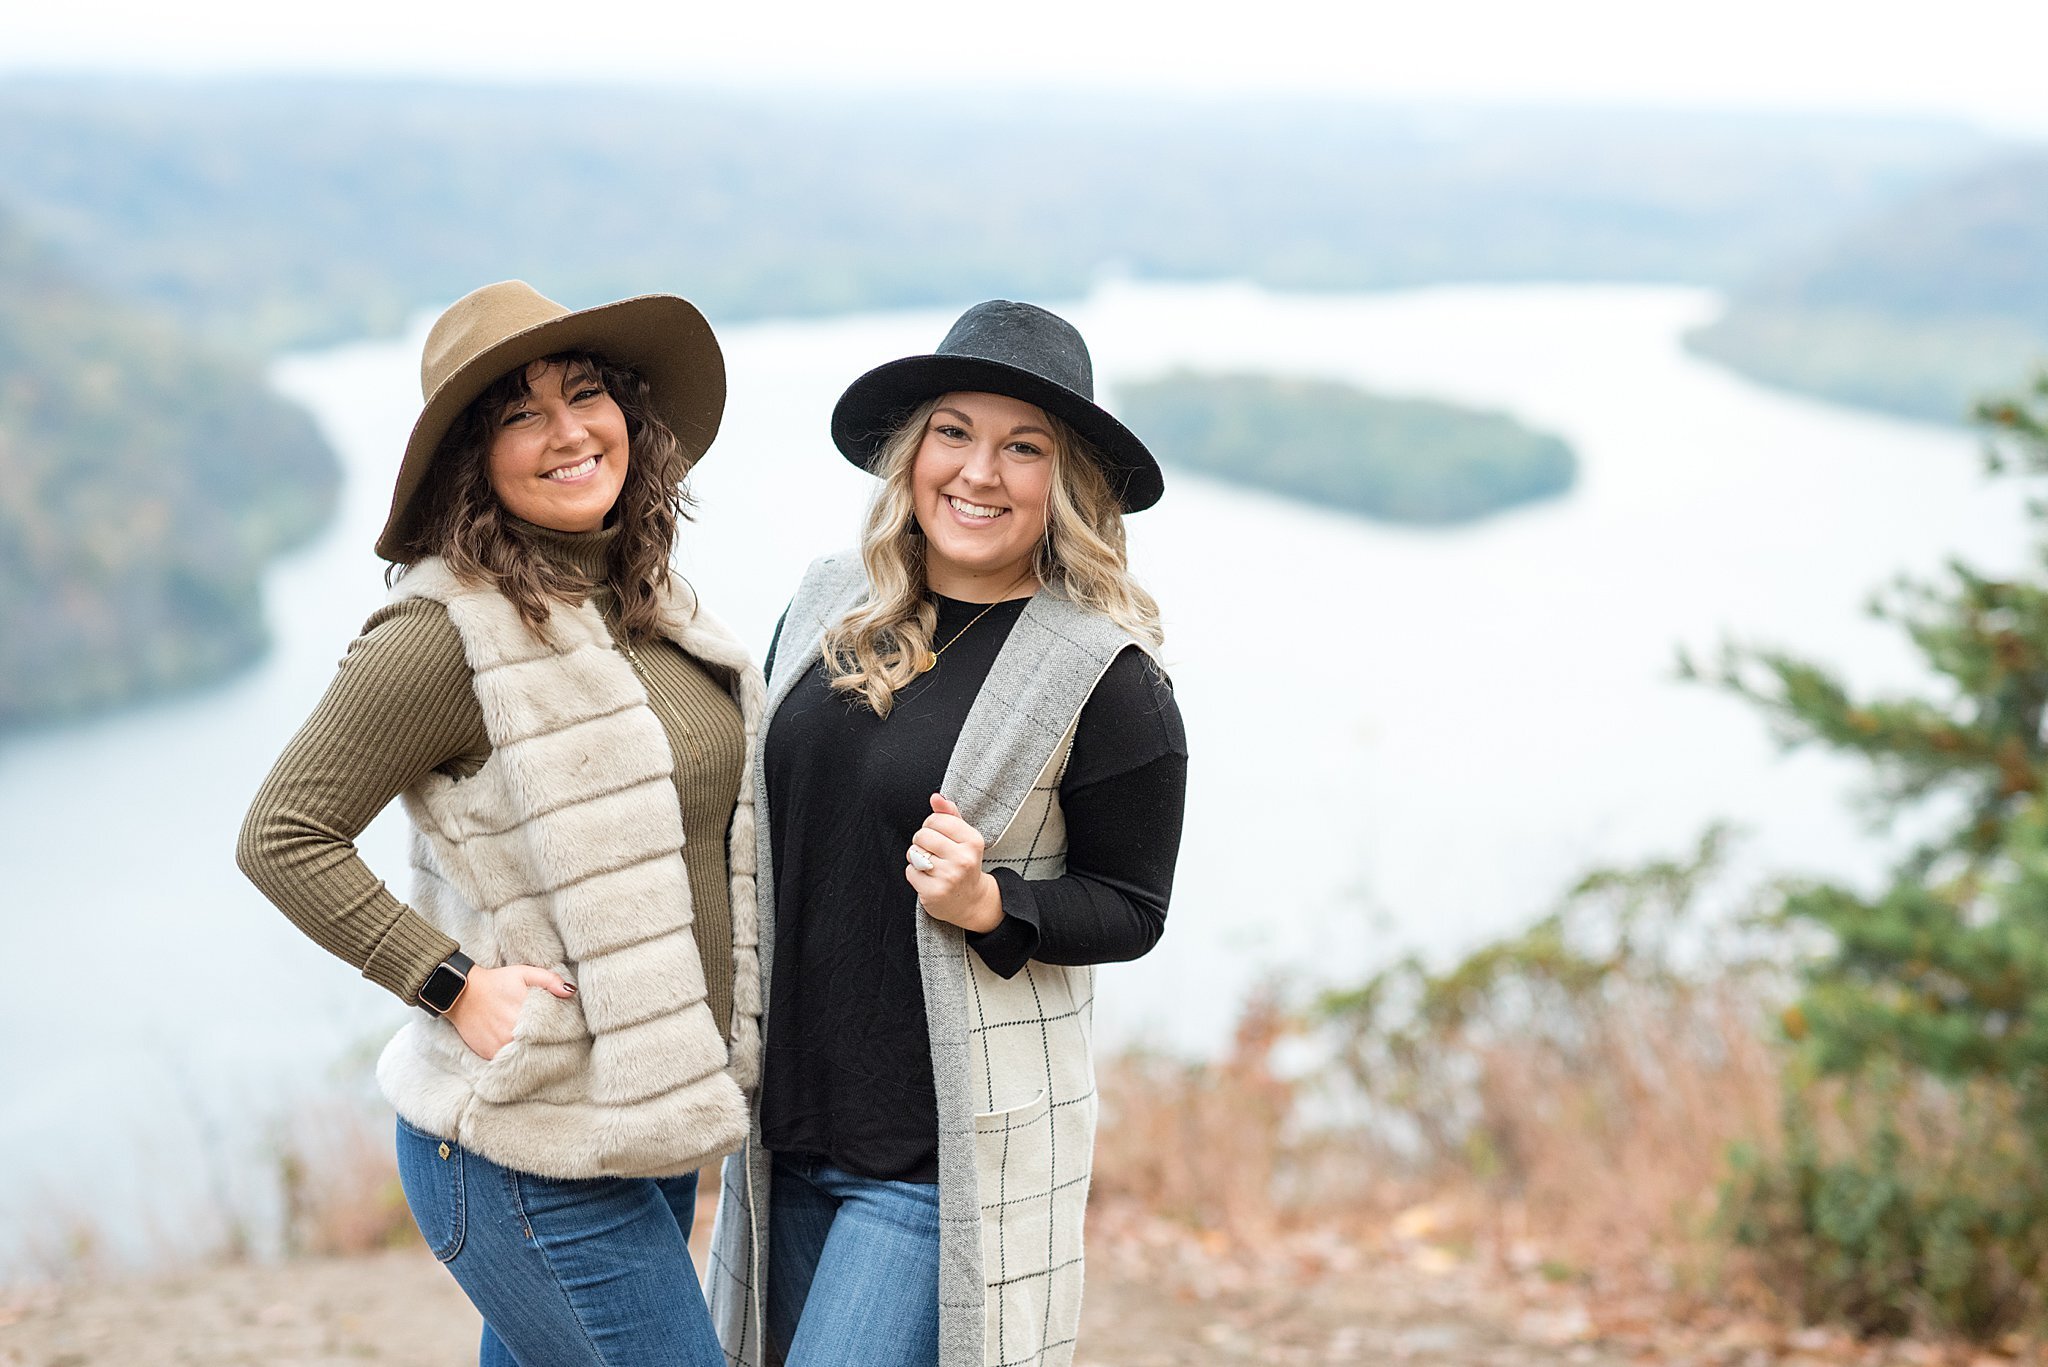 Pinnacle Overlook Holtwood Sister Portrait Photography 